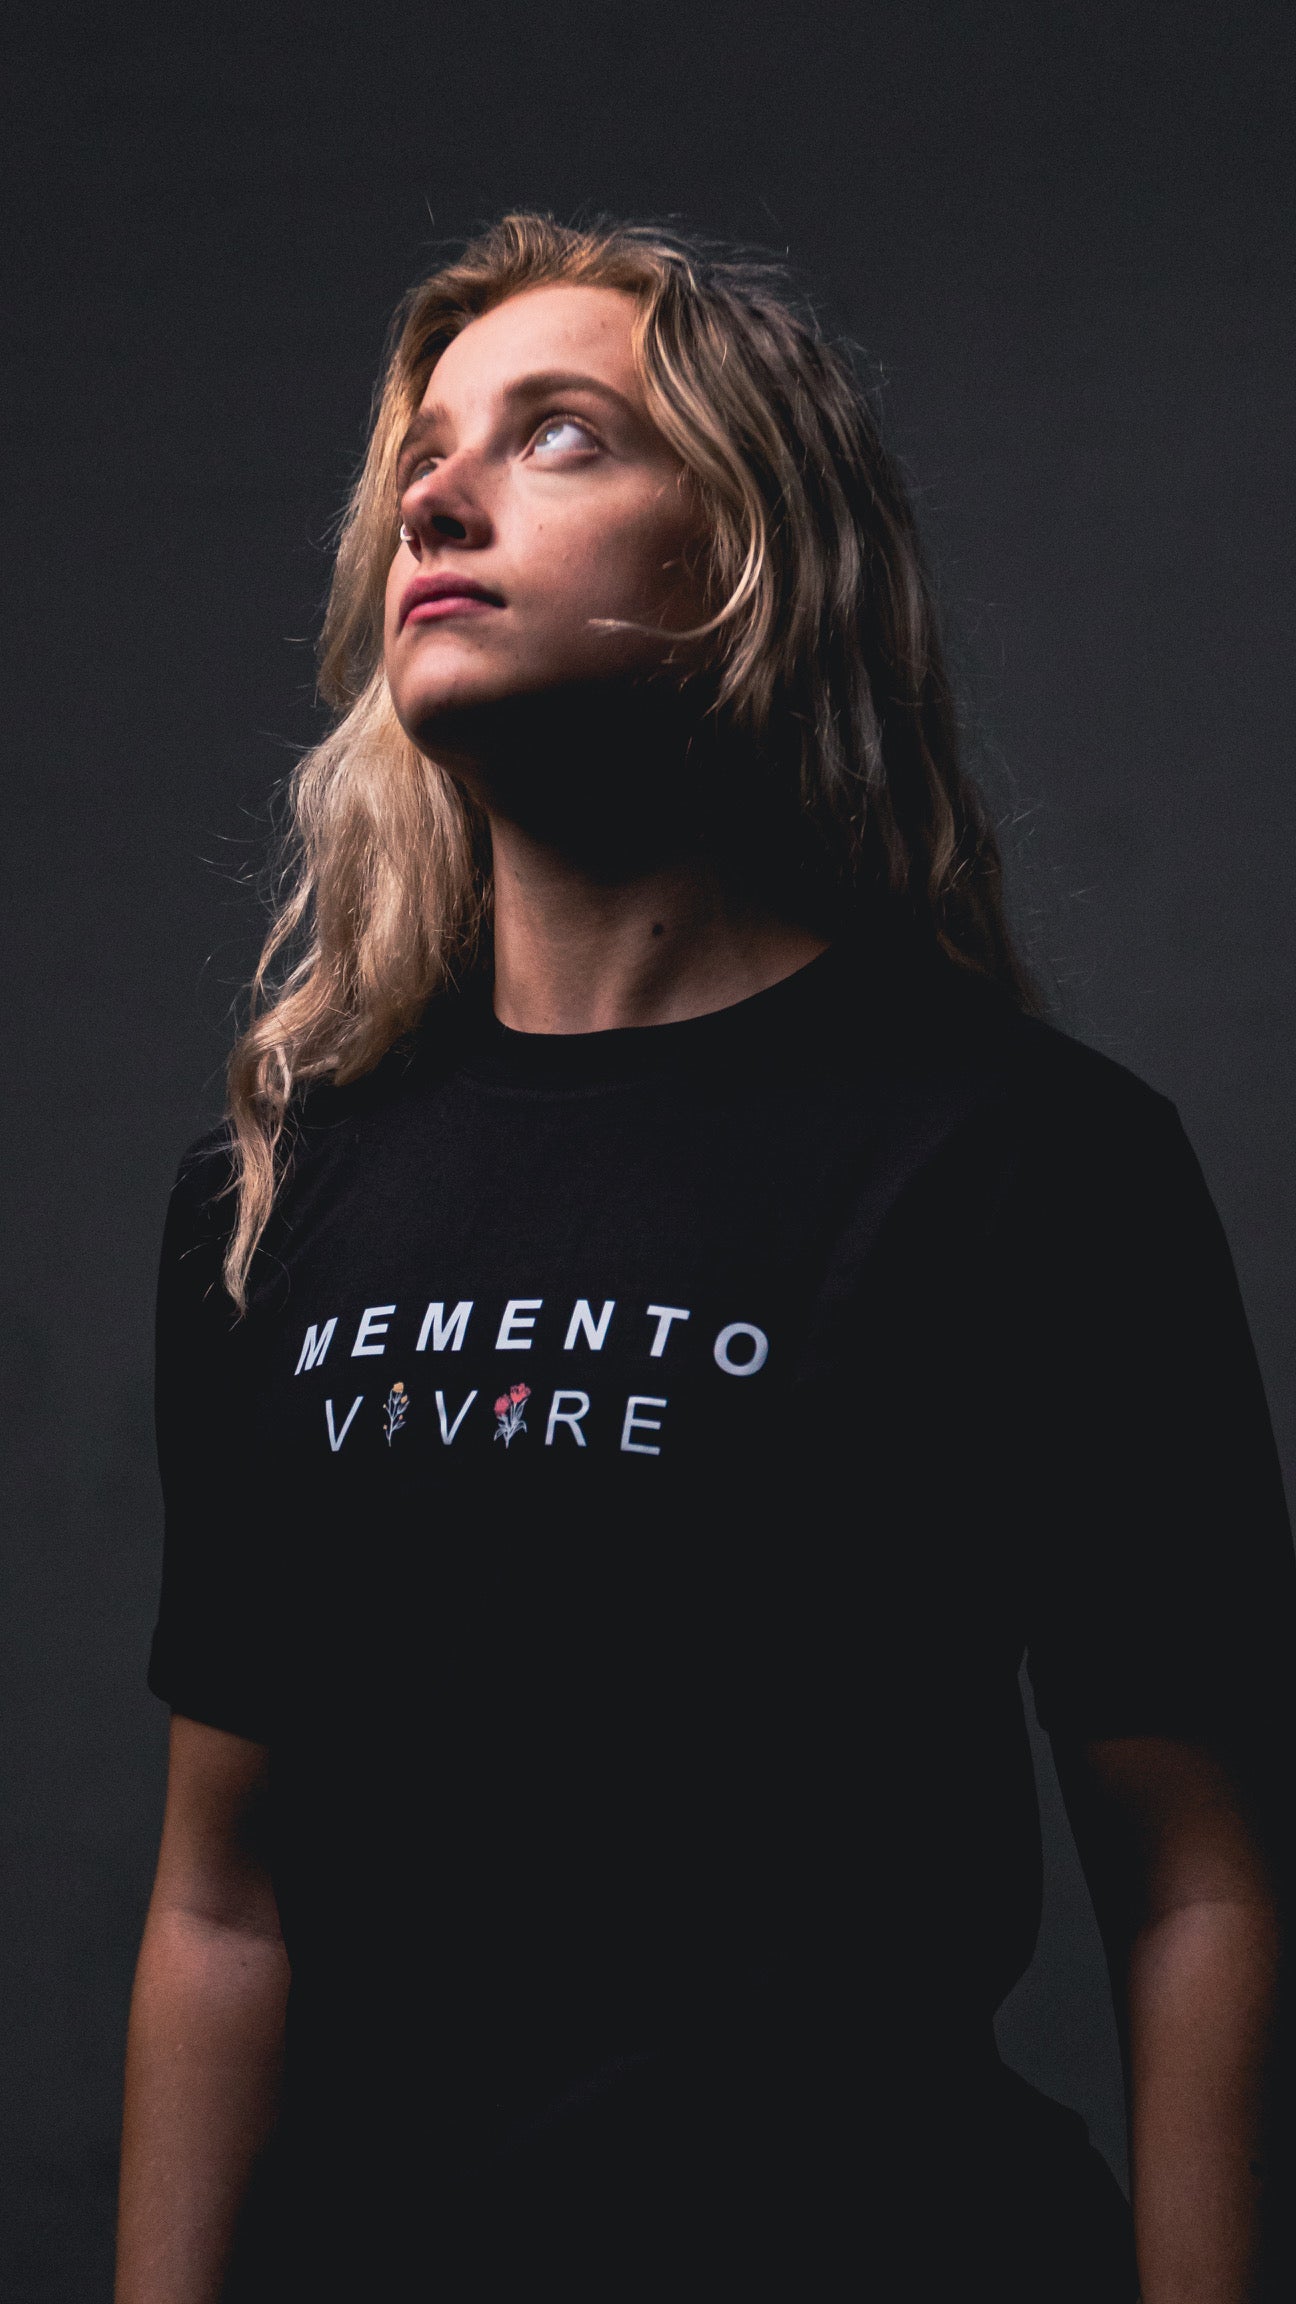 TheEverydayStoic "MEMENTO VIVERE" Official T Shirt (BLACK)